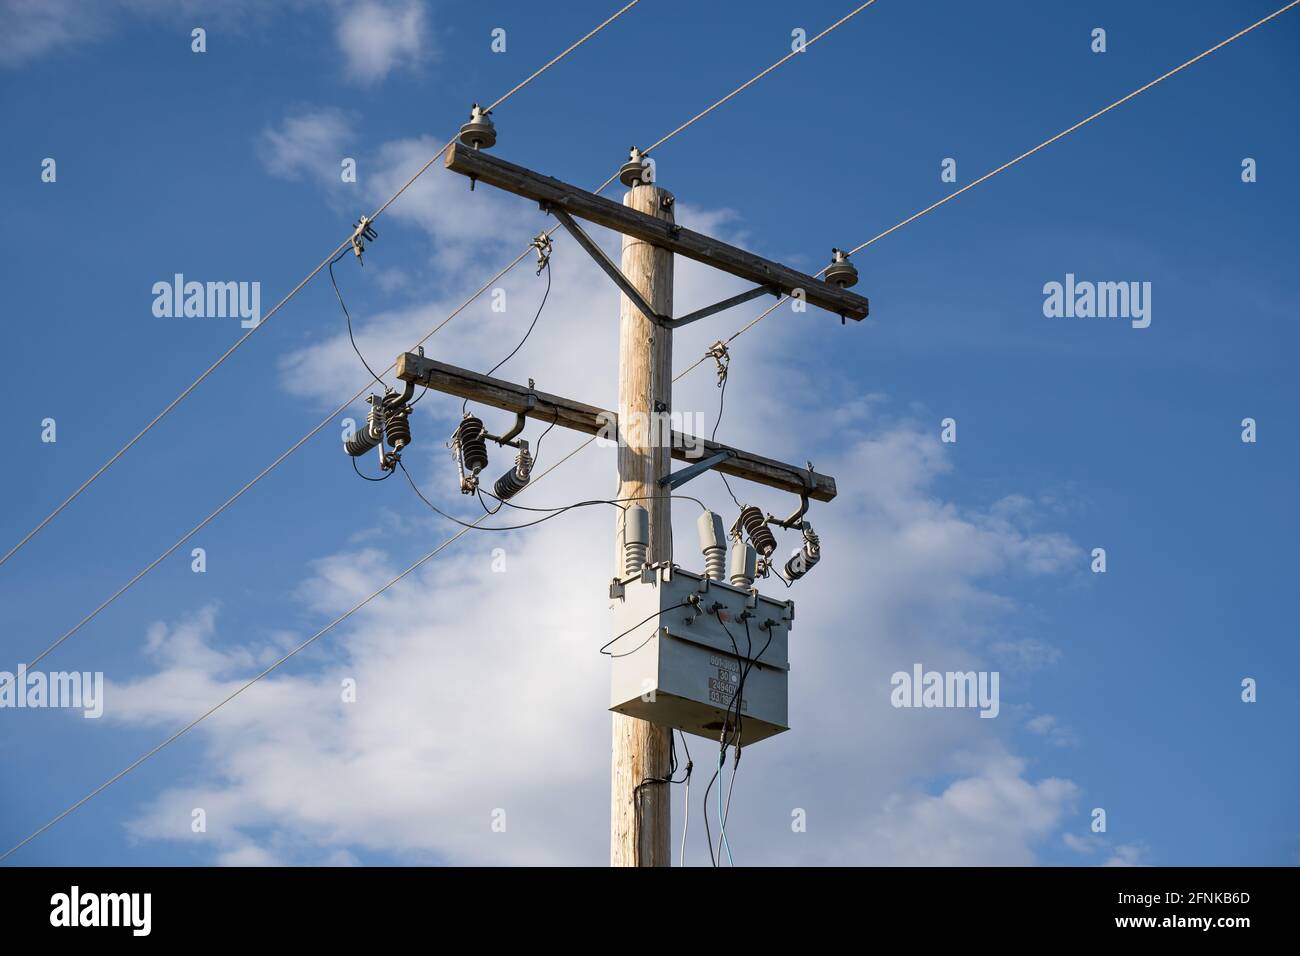 A wooden power pole and transformer with communication and transmission lines under a blue sky background. Stock Photo